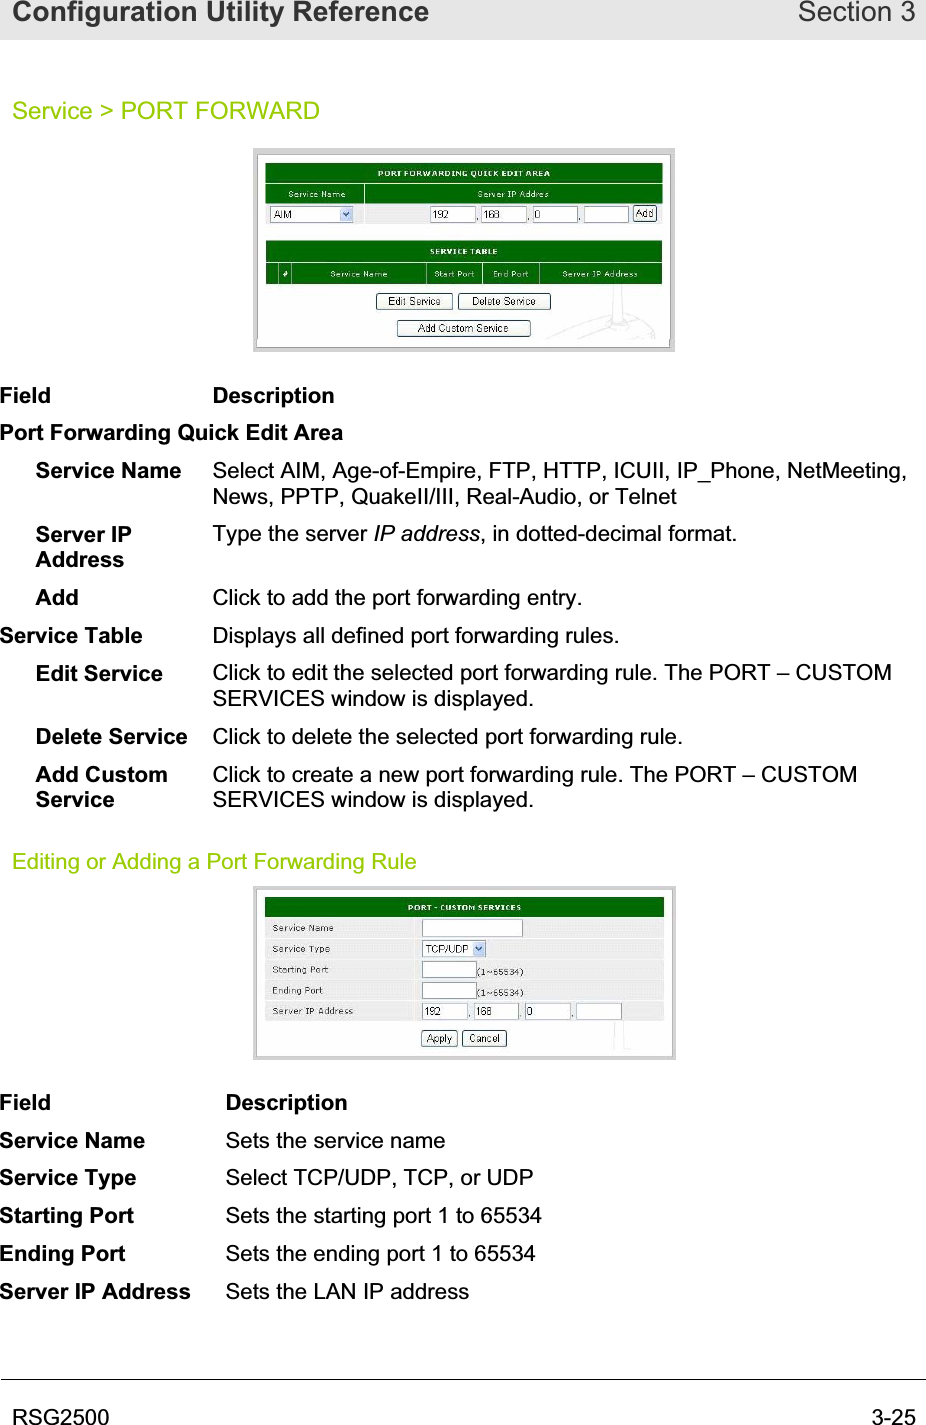 Configuration Utility Reference Section 3RSG2500  3-25Service &gt; PORT FORWARD Field Description Port Forwarding Quick Edit Area Service Name  Select AIM, Age-of-Empire, FTP, HTTP, ICUII, IP_Phone, NetMeeting, News, PPTP, QuakeII/III, Real-Audio, or Telnet Server IP AddressType the server IP address, in dotted-decimal format. Add Click to add the port forwarding entry. Service Table  Displays all defined port forwarding rules. Edit Service  Click to edit the selected port forwarding rule. The PORT – CUSTOM SERVICES window is displayed. Delete Service  Click to delete the selected port forwarding rule. Add Custom ServiceClick to create a new port forwarding rule. The PORT – CUSTOM SERVICES window is displayed. Editing or Adding a Port Forwarding Rule Field Description Service Name  Sets the service name Service Type  Select TCP/UDP, TCP, or UDP Starting Port  Sets the starting port 1 to 65534 Ending Port  Sets the ending port 1 to 65534 Server IP Address  Sets the LAN IP address 